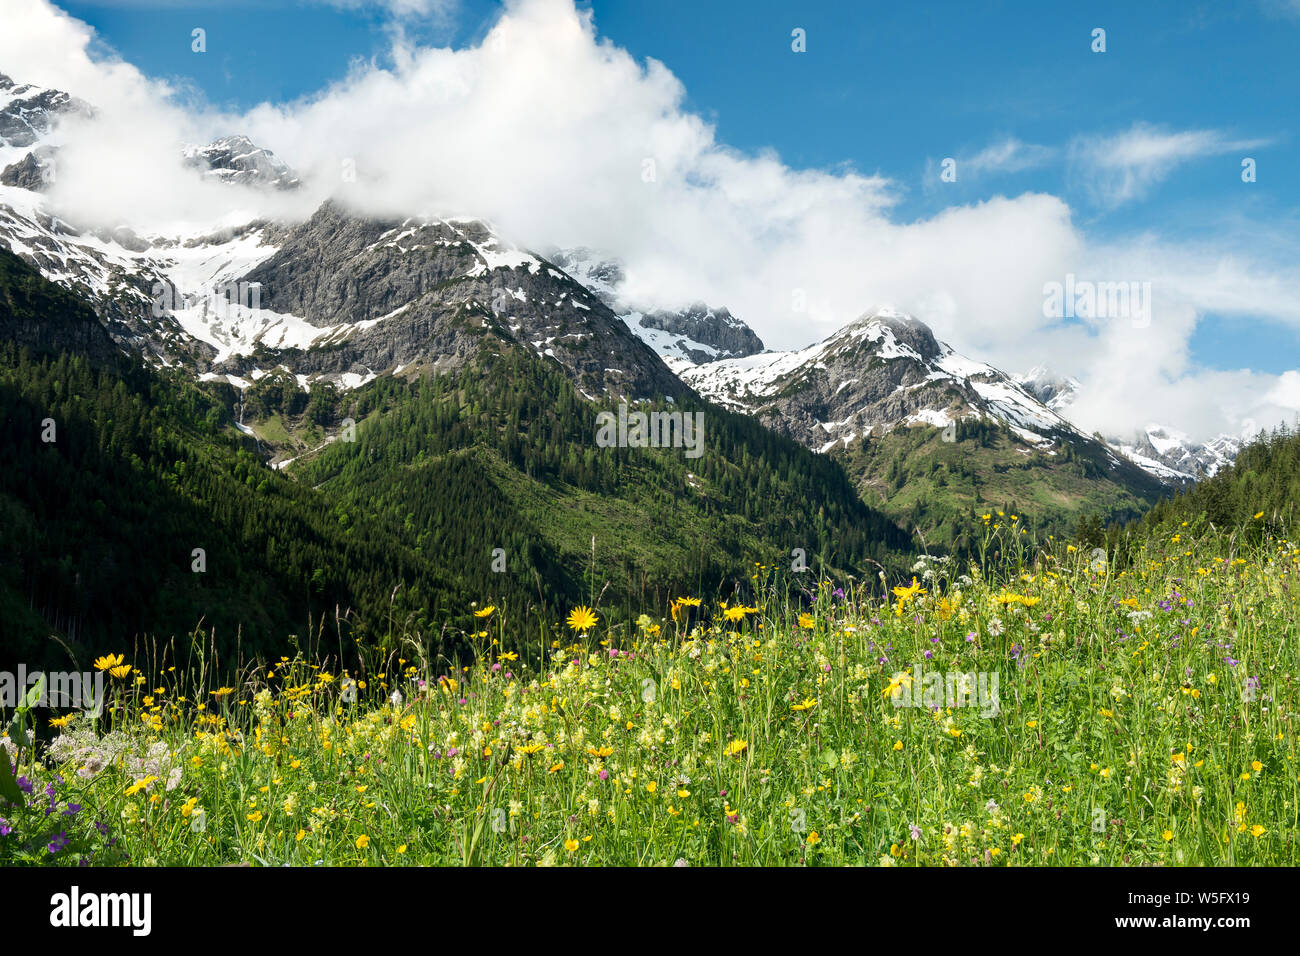 Austria, Tyrol, Allgau Alps, Hornbach valley, a side valley of the Lech watershed, meadow Stock Photo